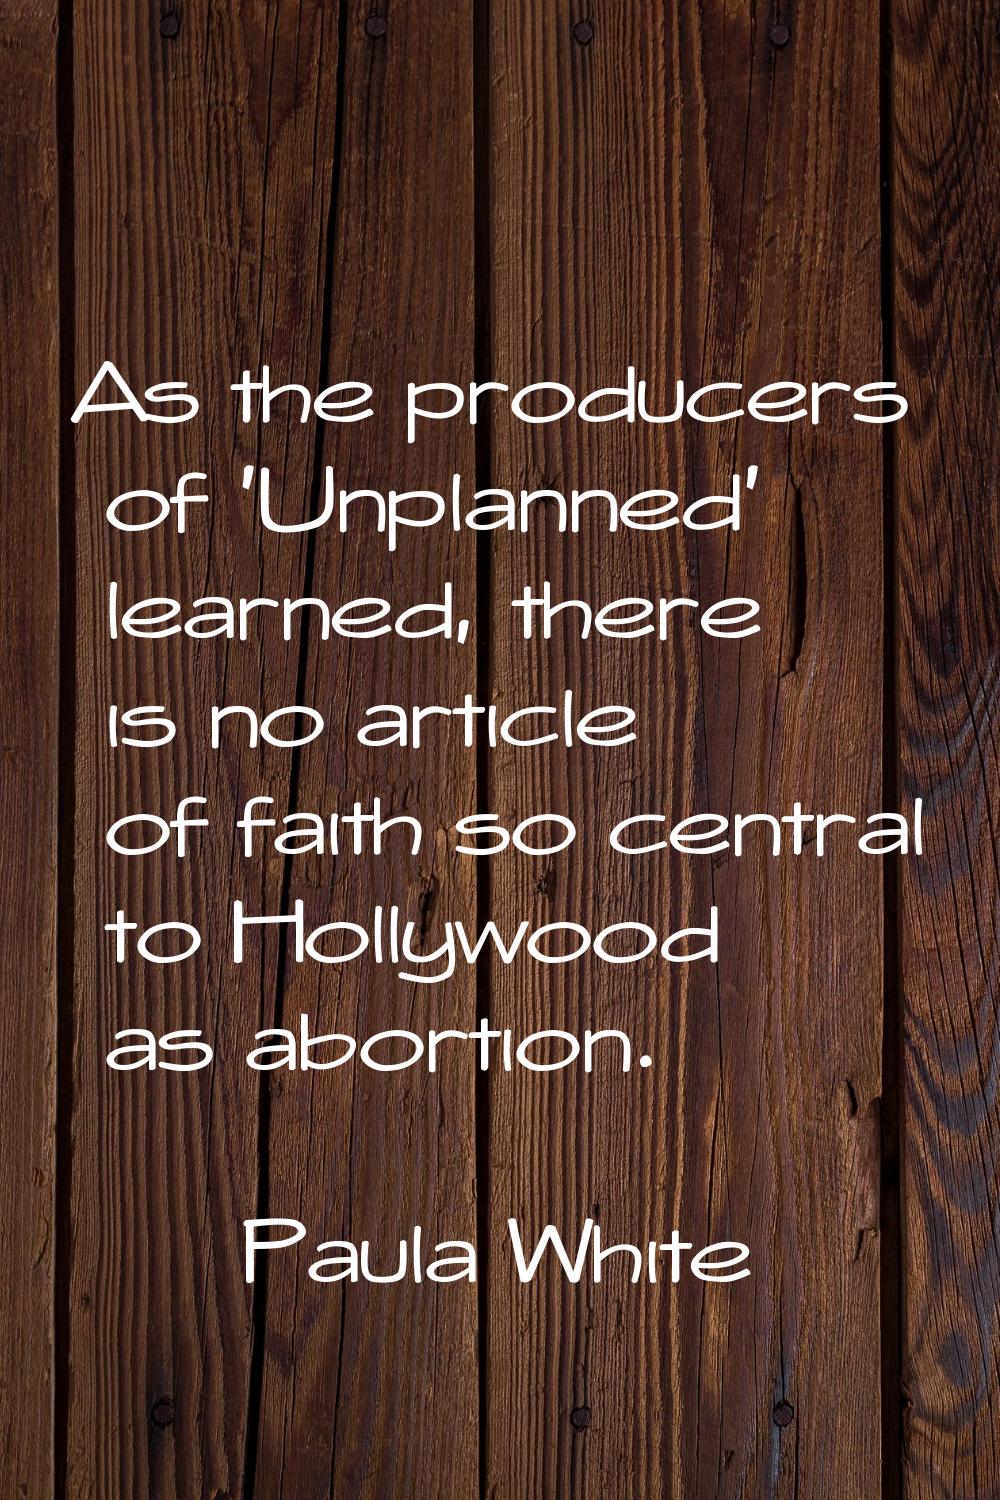 As the producers of 'Unplanned' learned, there is no article of faith so central to Hollywood as ab